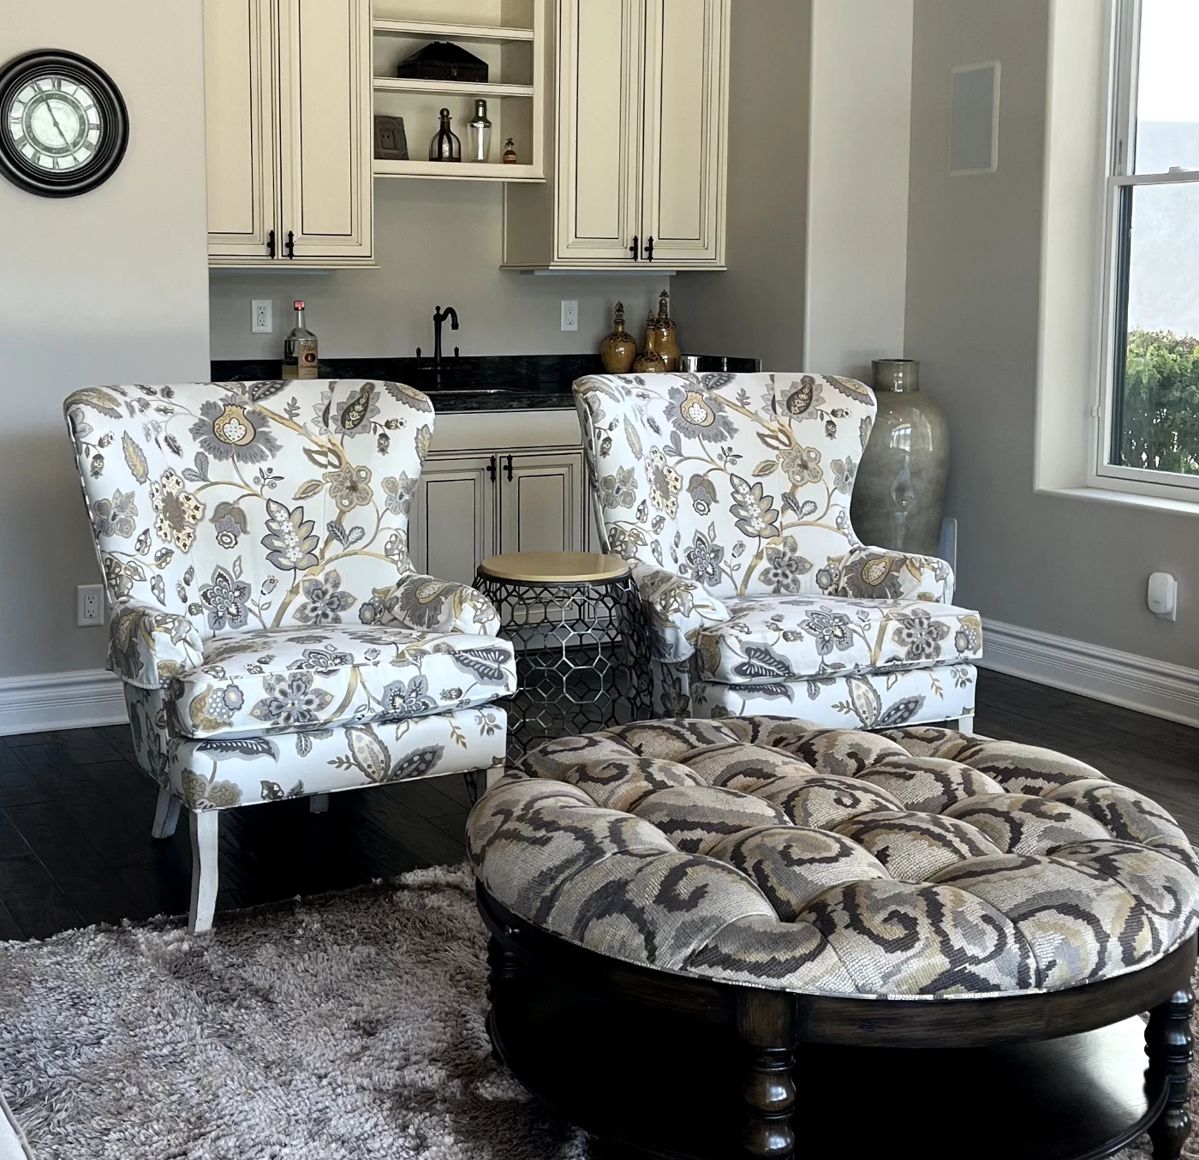 Drexel heritage floral chairs and ottoman